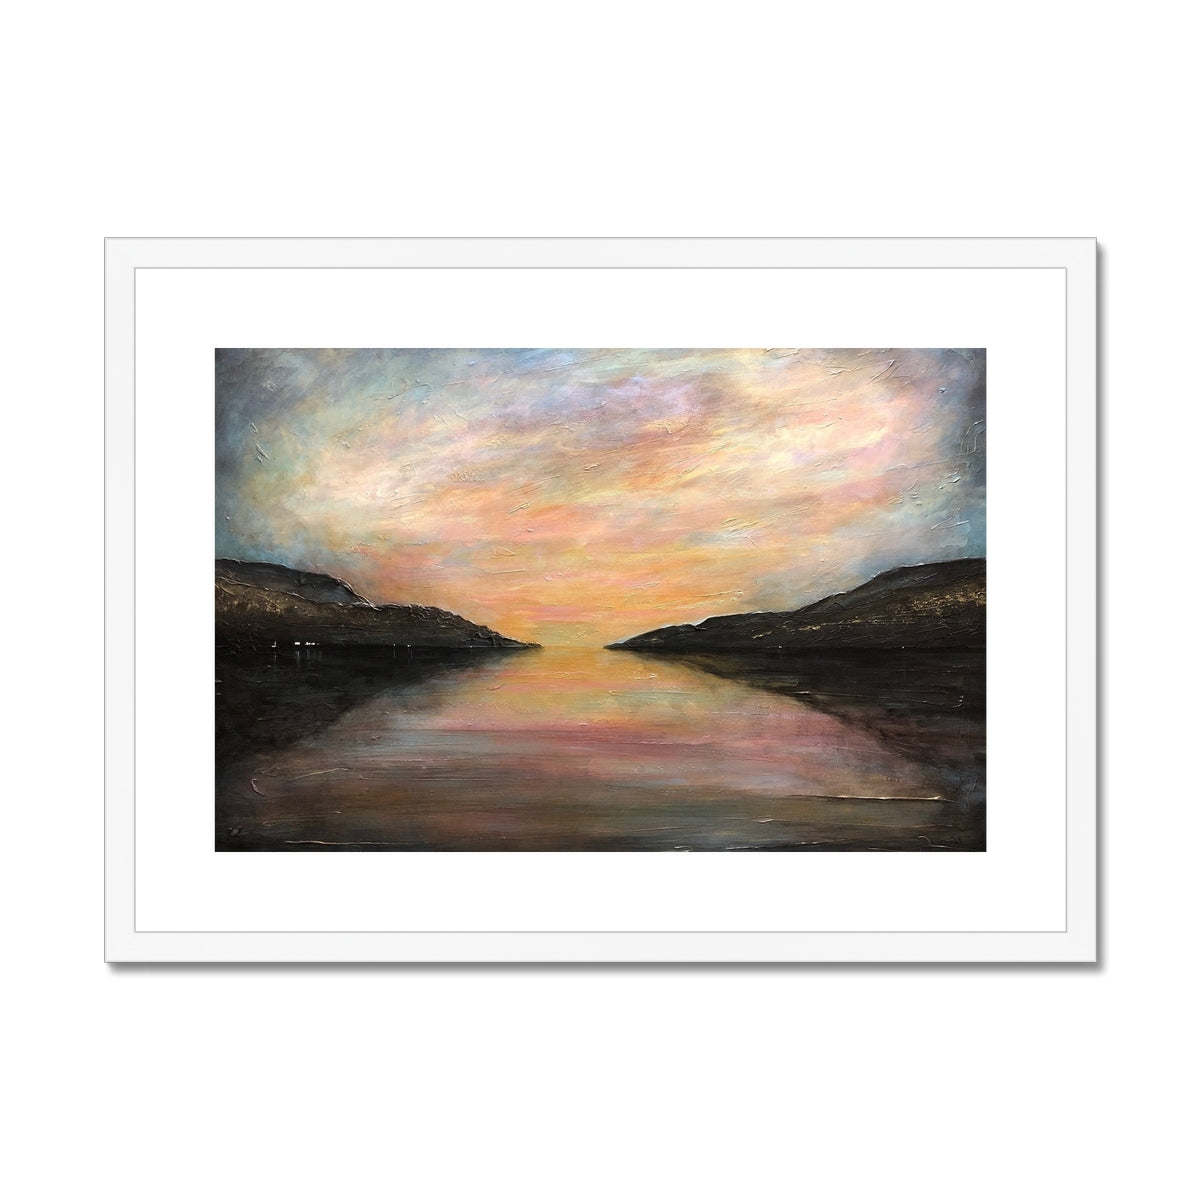 Loch Ness Glow Painting | Framed & Mounted Prints From Scotland-Framed & Mounted Prints-Scottish Lochs & Mountains Art Gallery-A2 Landscape-White Frame-Paintings, Prints, Homeware, Art Gifts From Scotland By Scottish Artist Kevin Hunter